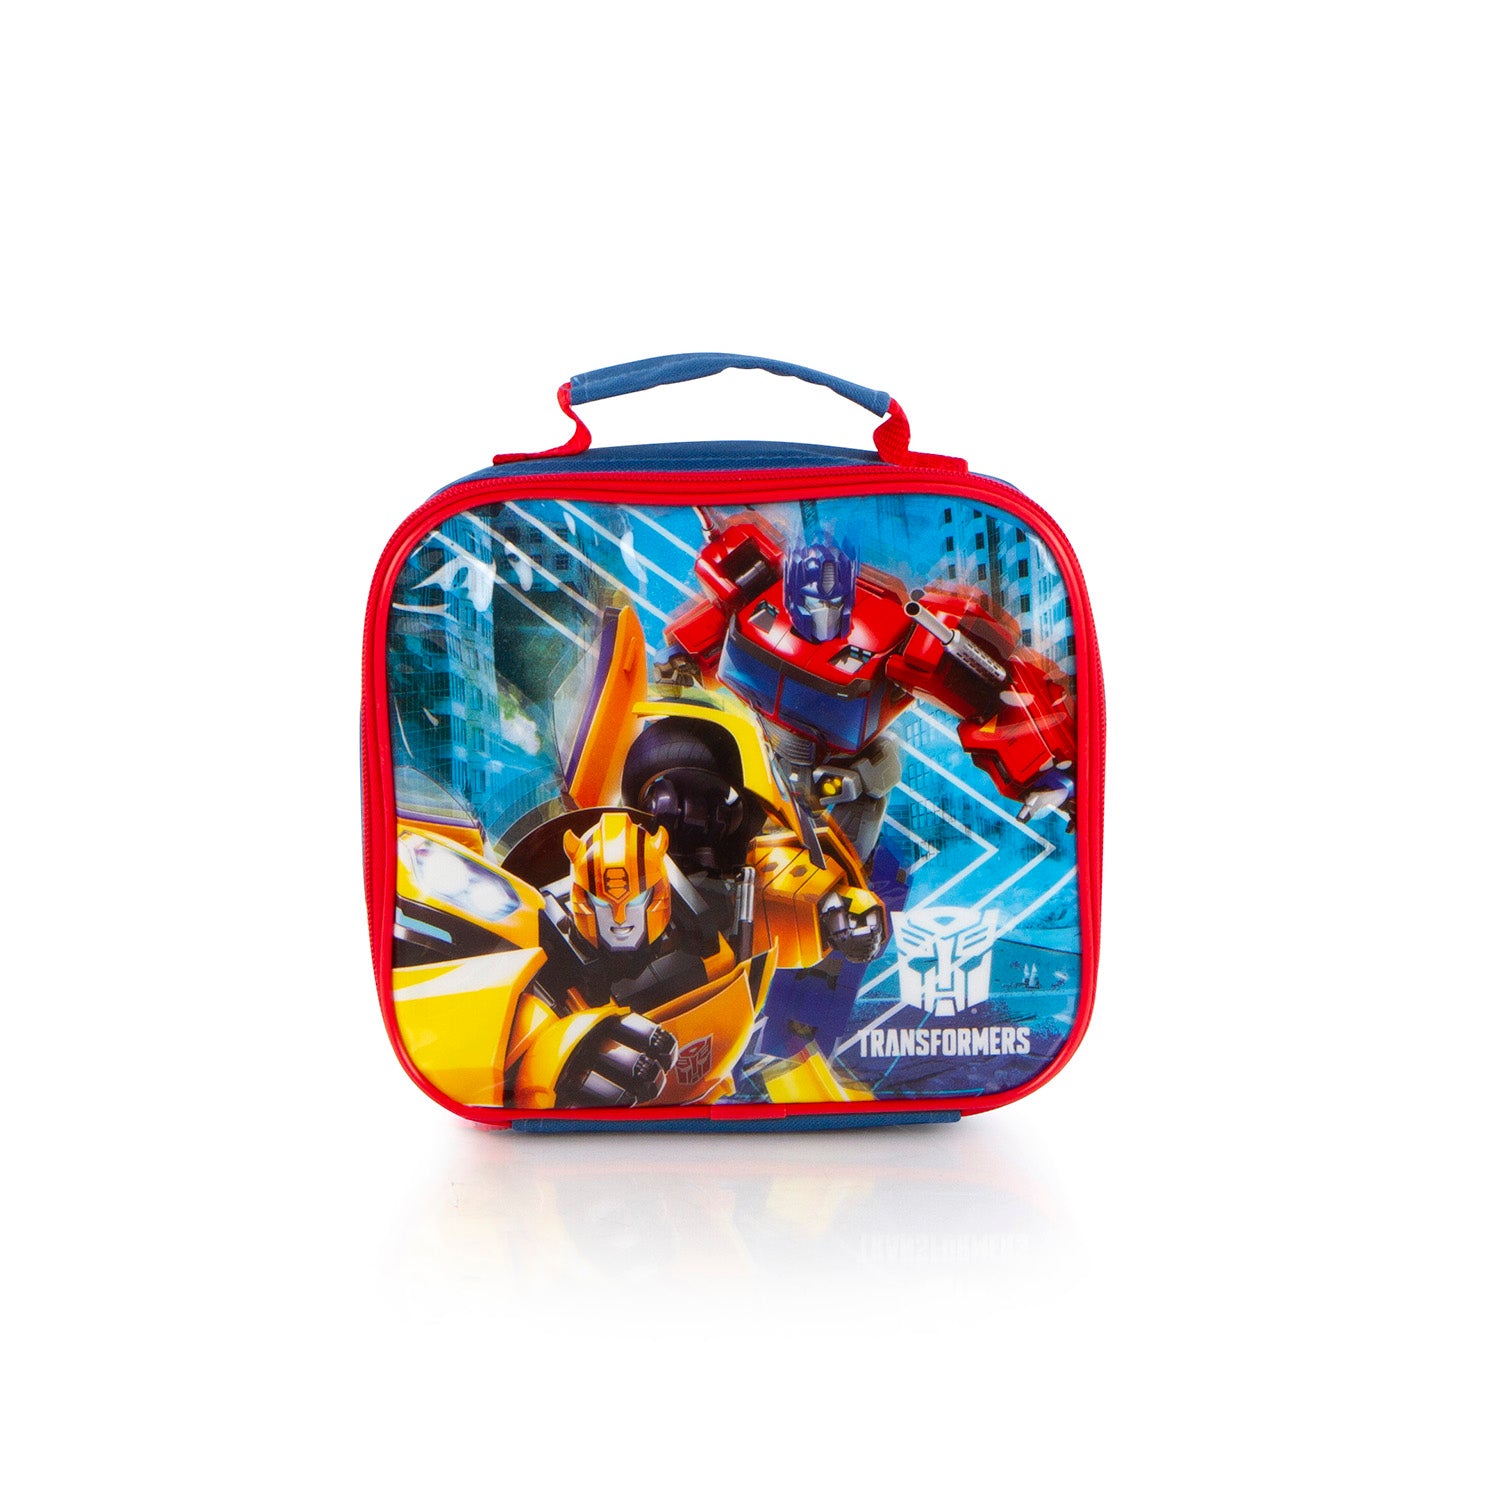 Transformers Deluxe Backpack and Lunch Bag Set